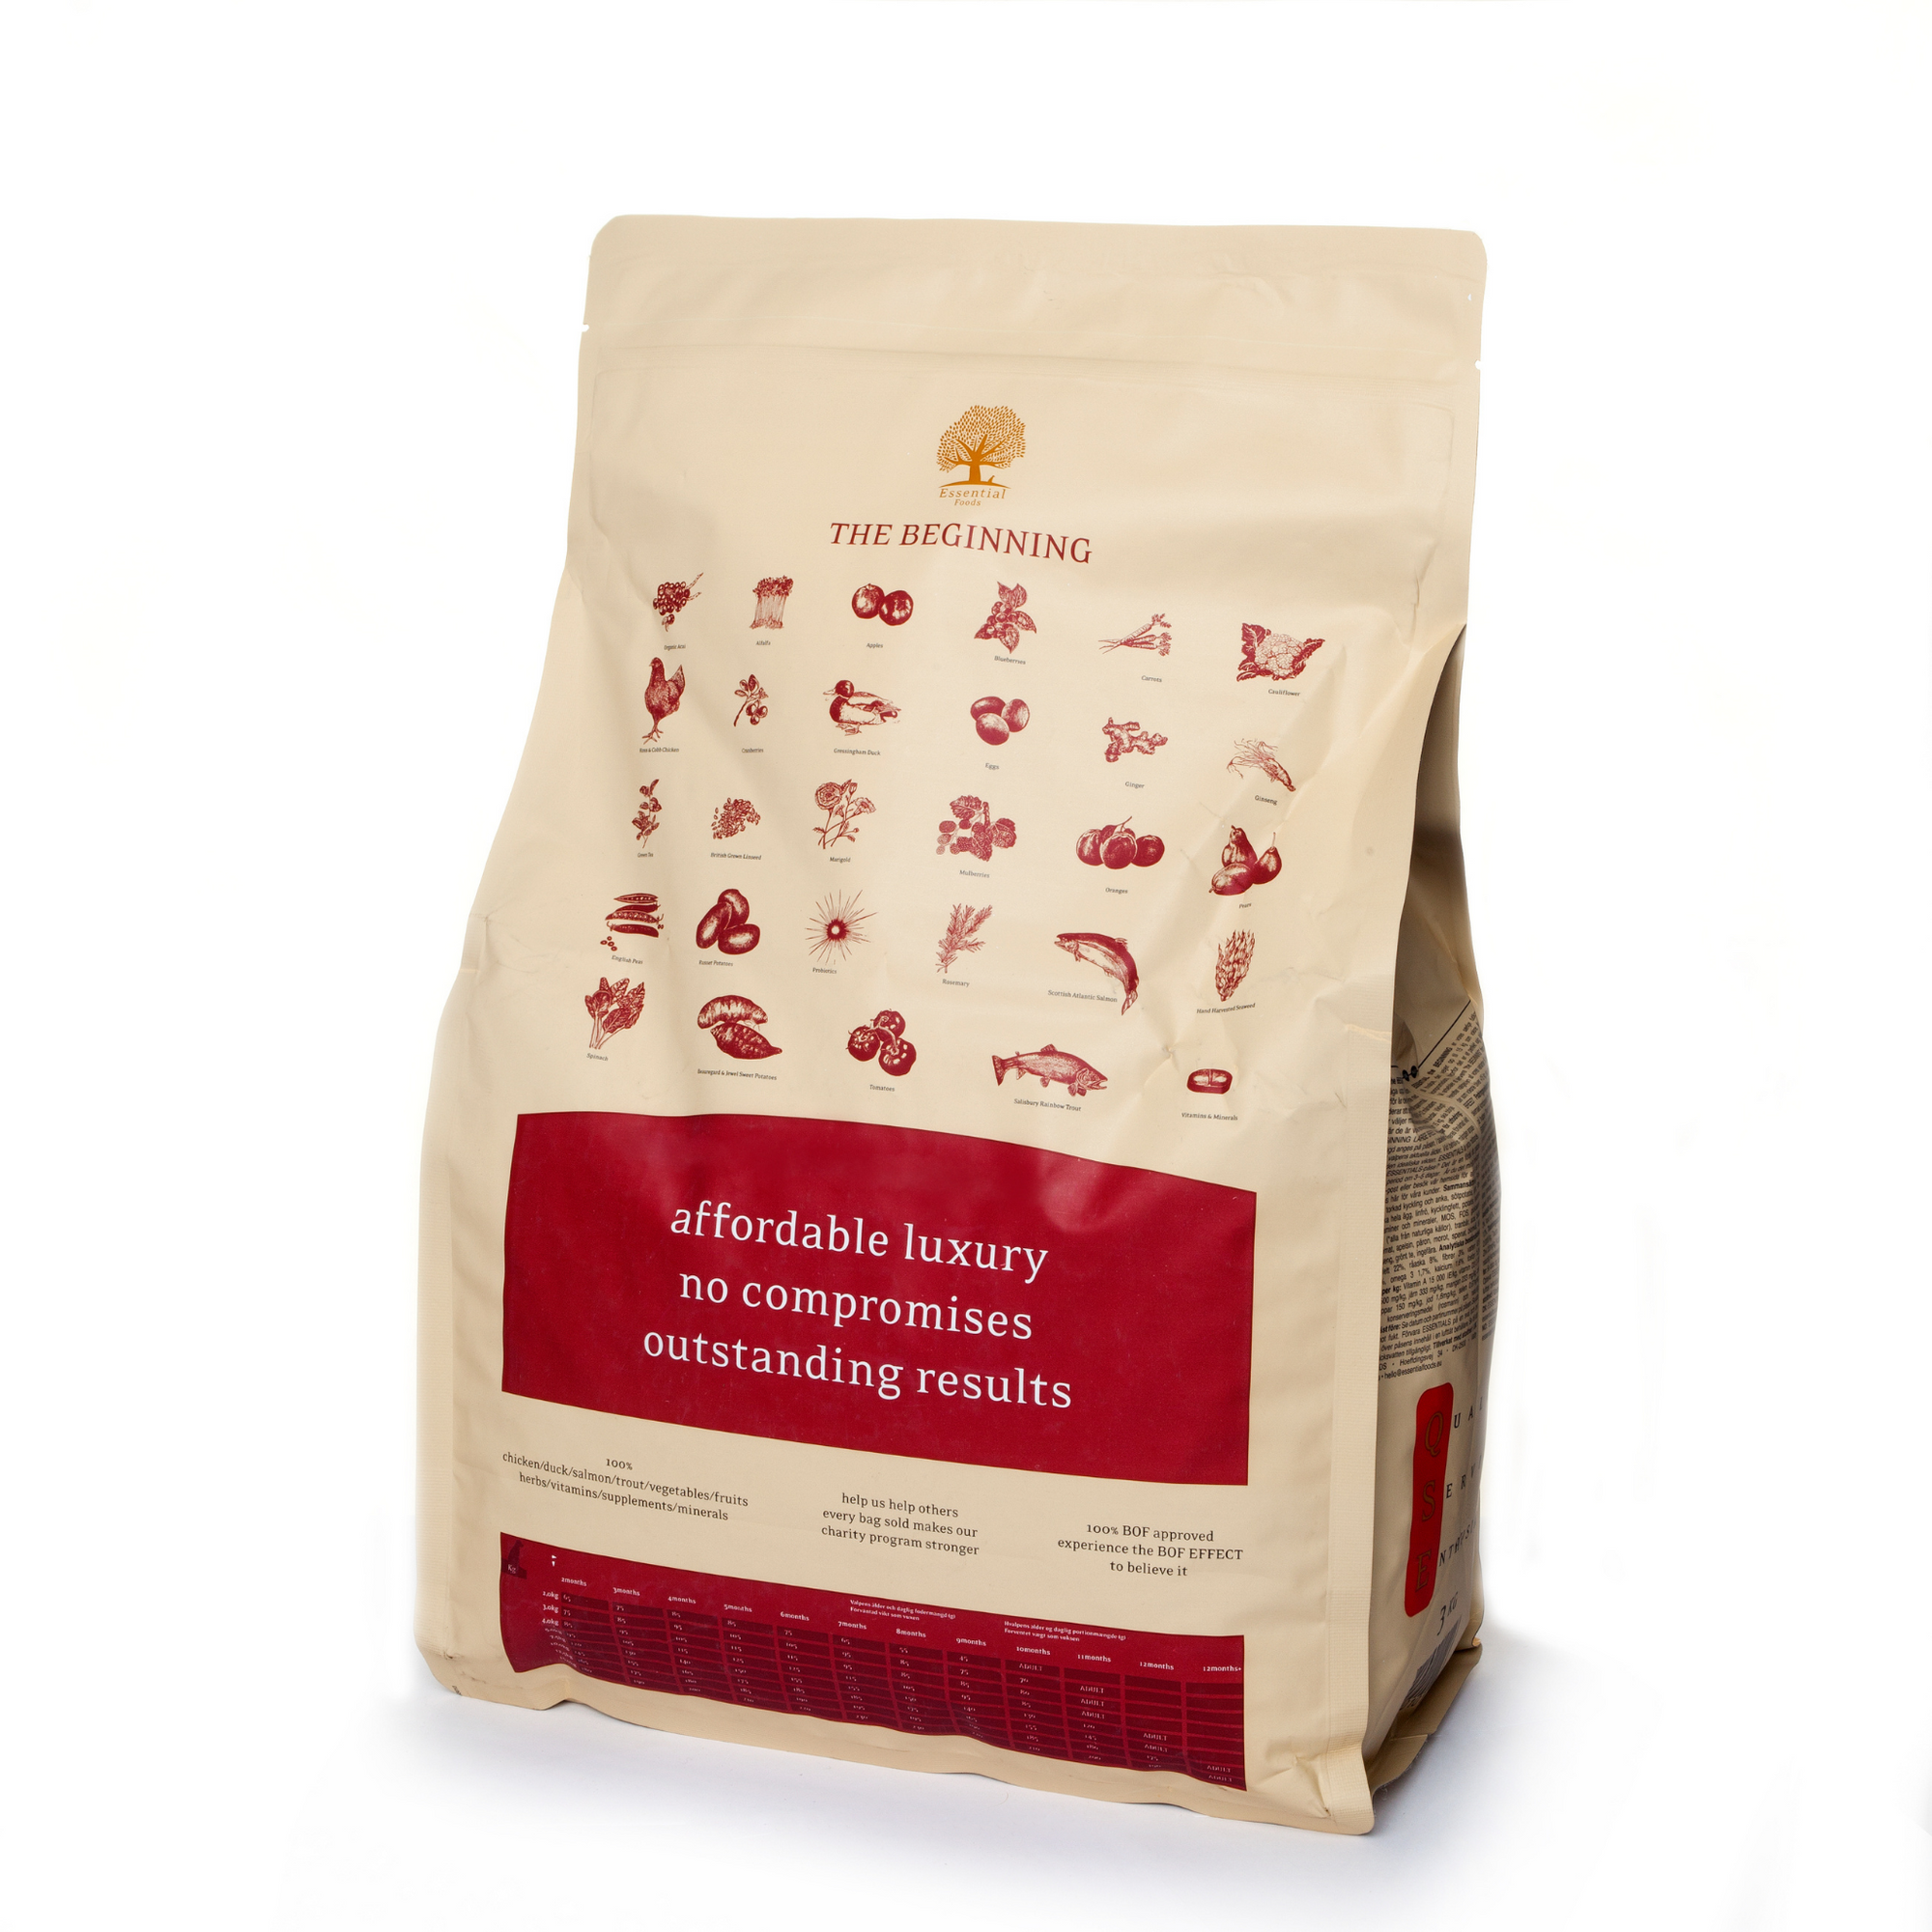 85% meat duck, chick, salmon, trout, eggs Super premium grainless feed for puppies of small breeds The BEGINNING